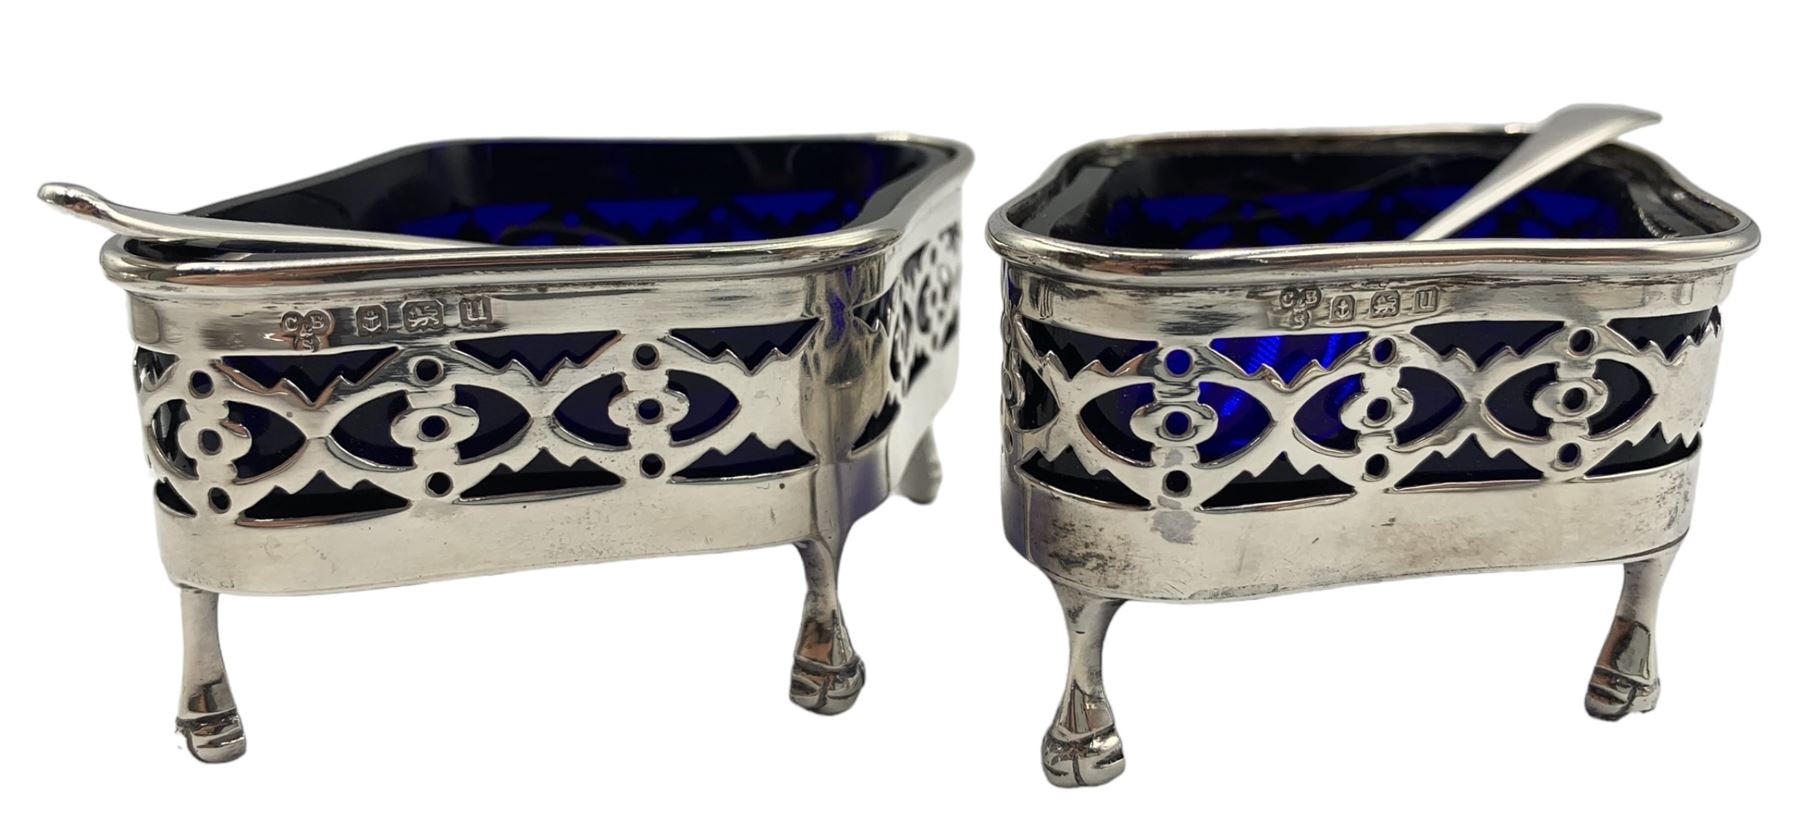 Pair of silver oval open salts with pierced sides - Image 7 of 8